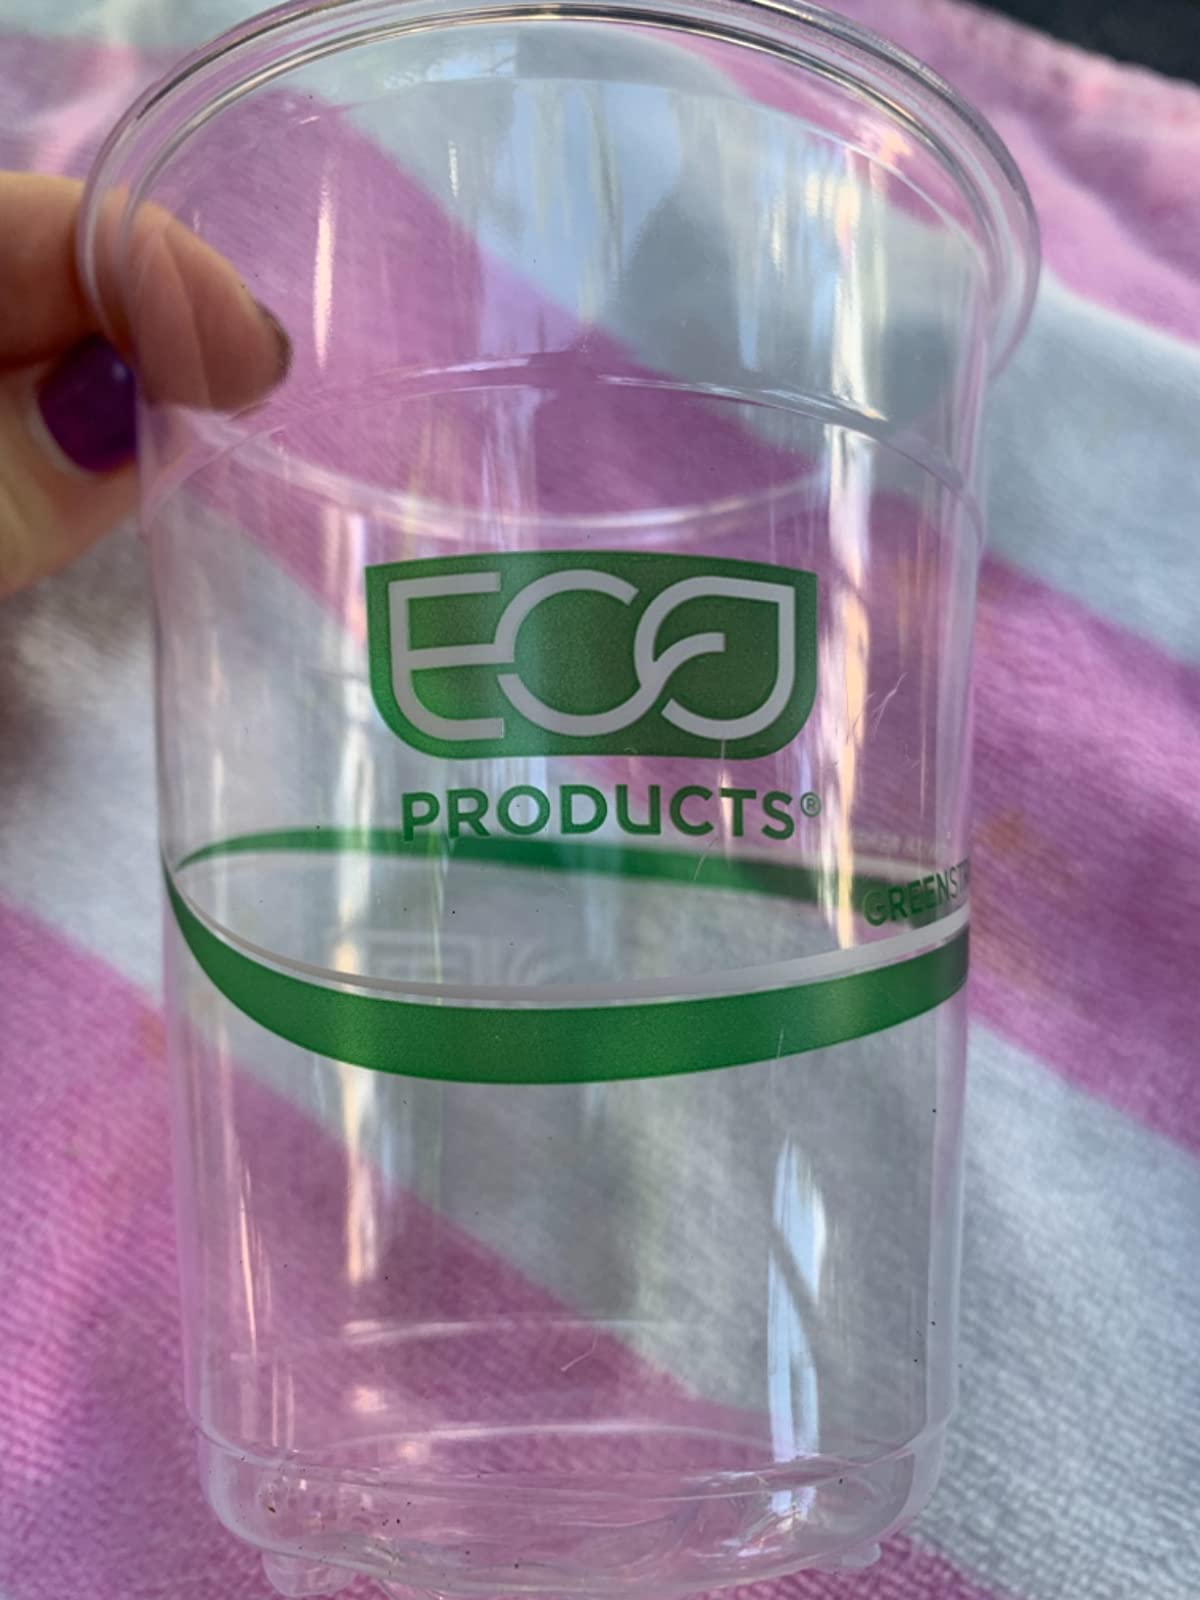 https://plastic.education/wp-content/uploads/2023/01/eco-products.jpg